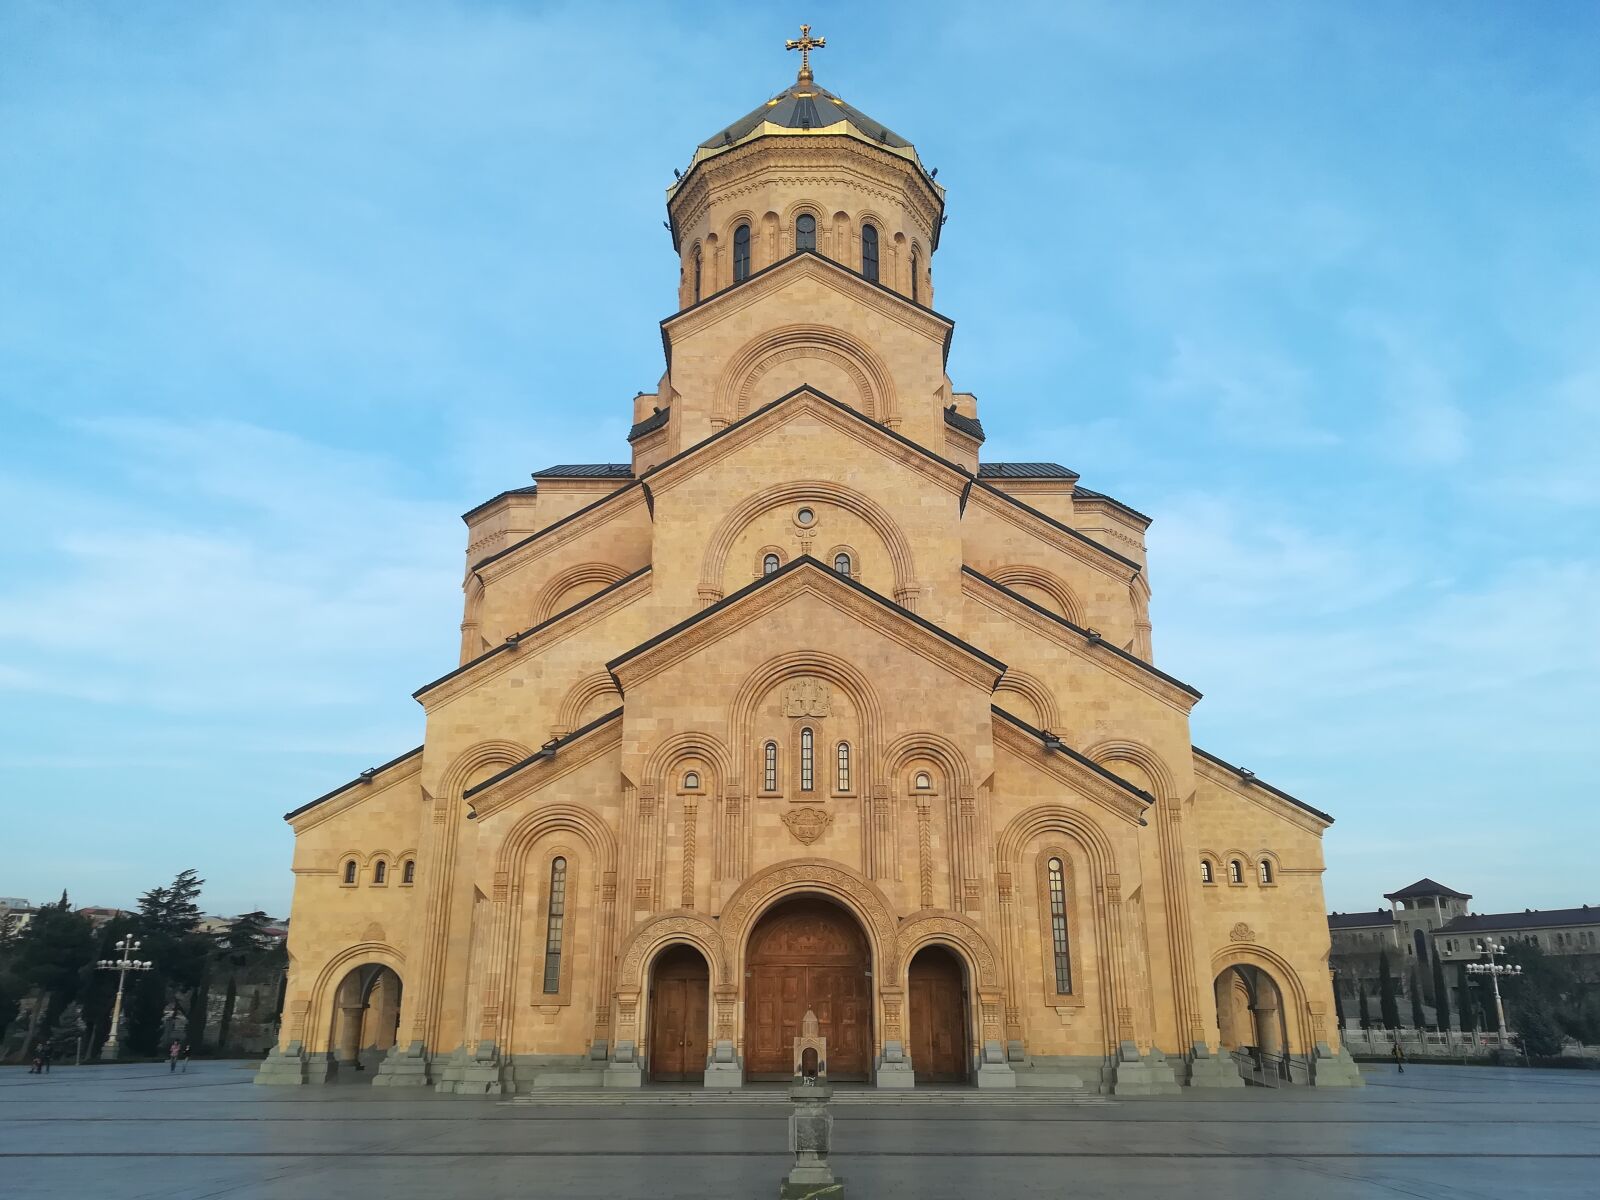 HUAWEI P8 lite 2017 sample photo. Architecture, church, travel photography